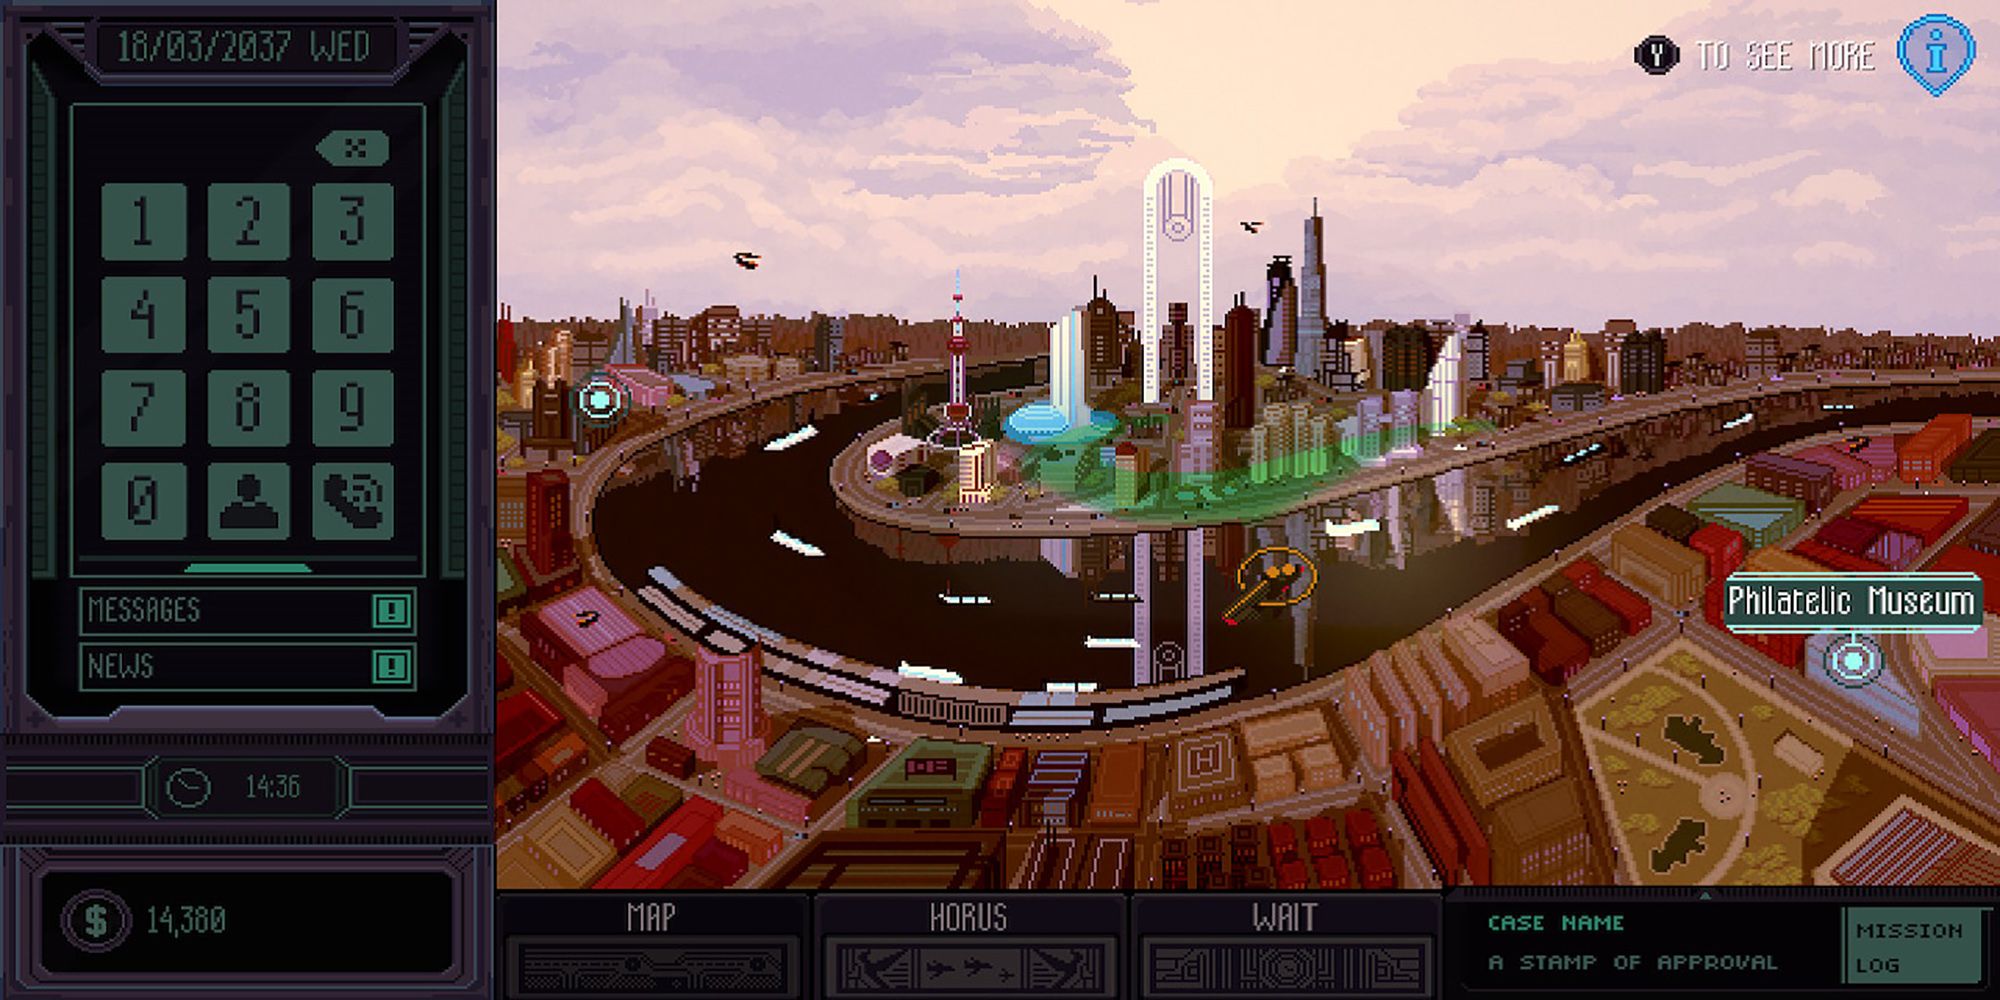 The cityscape of Shanghai in Chinatown Detective Agency.